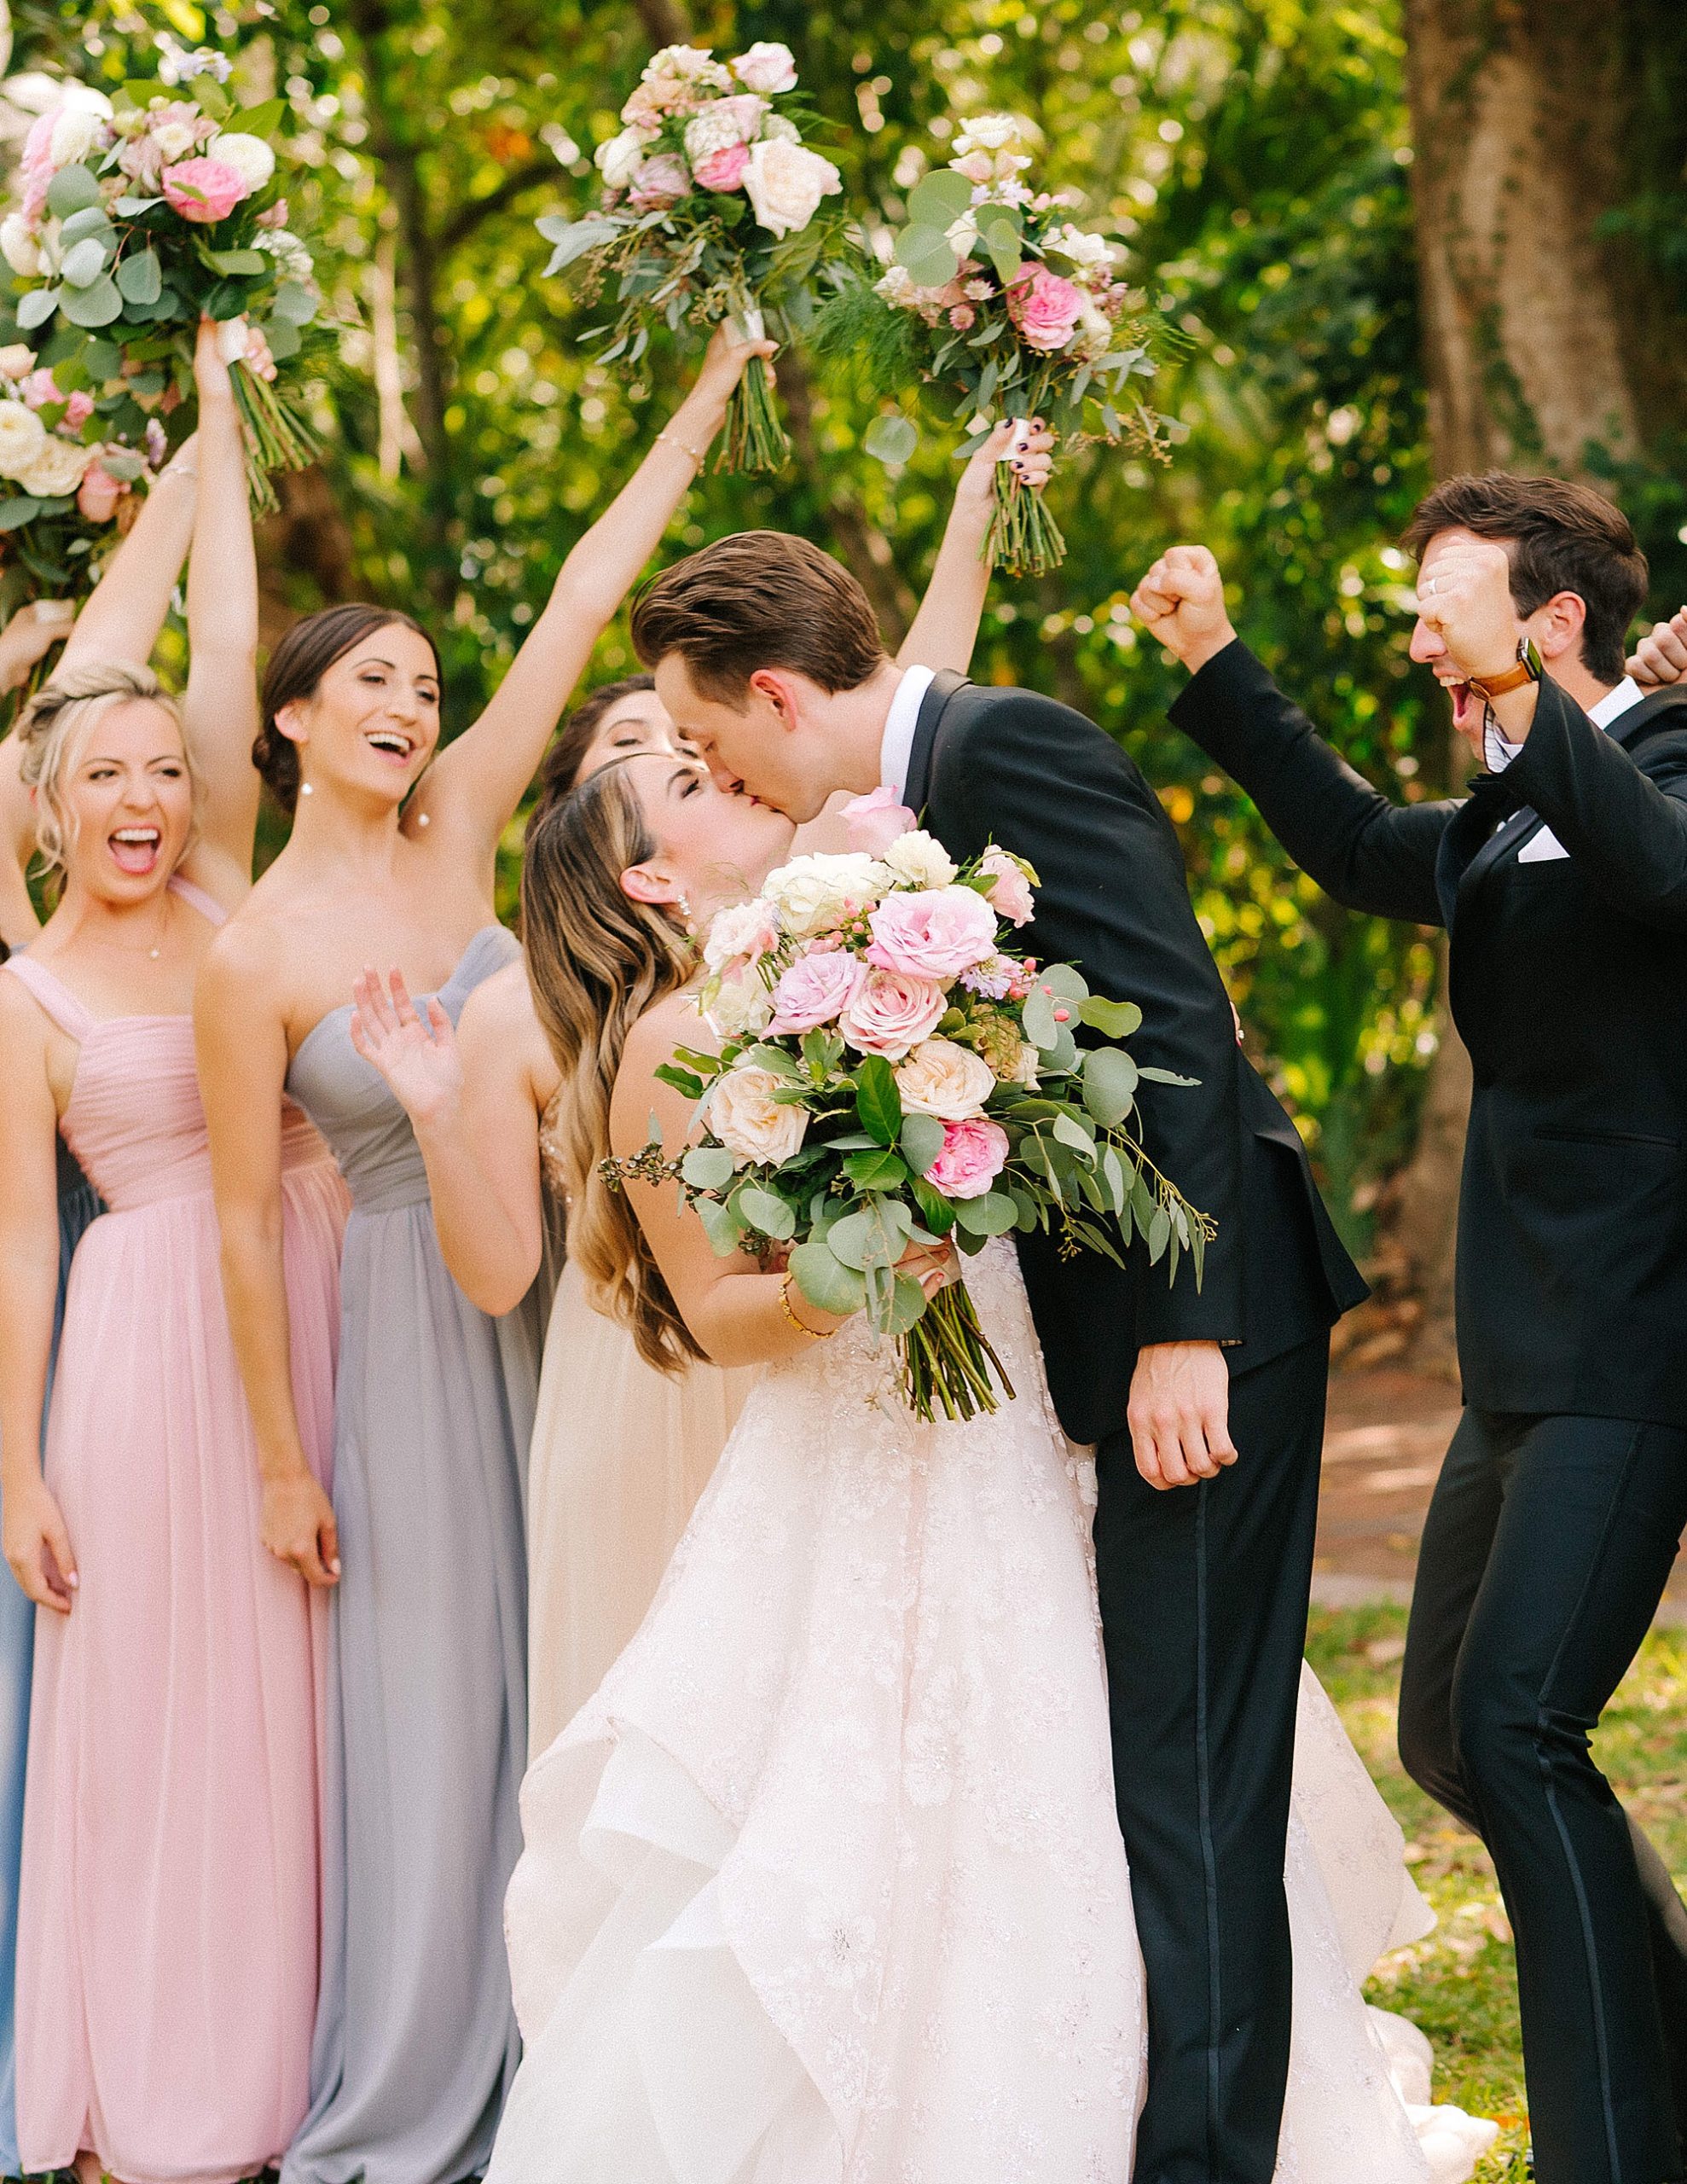 newlyweds kiss with wedding party cheering them on